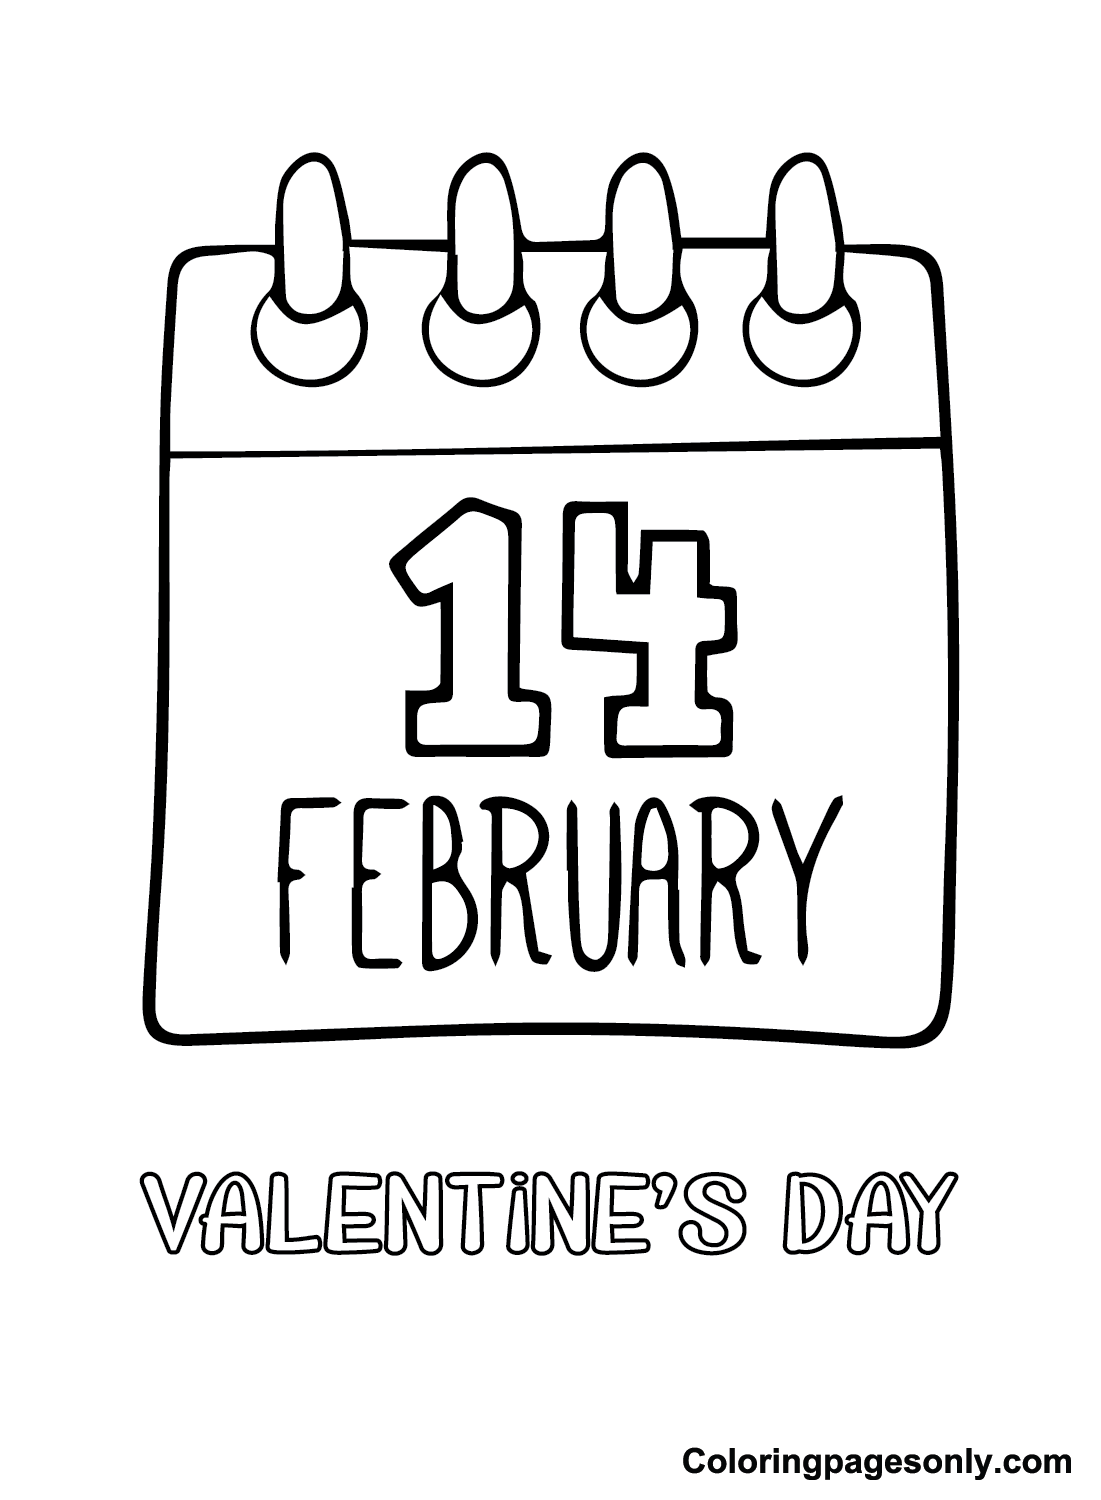 Valentines Day Card Printable Coloring Pages